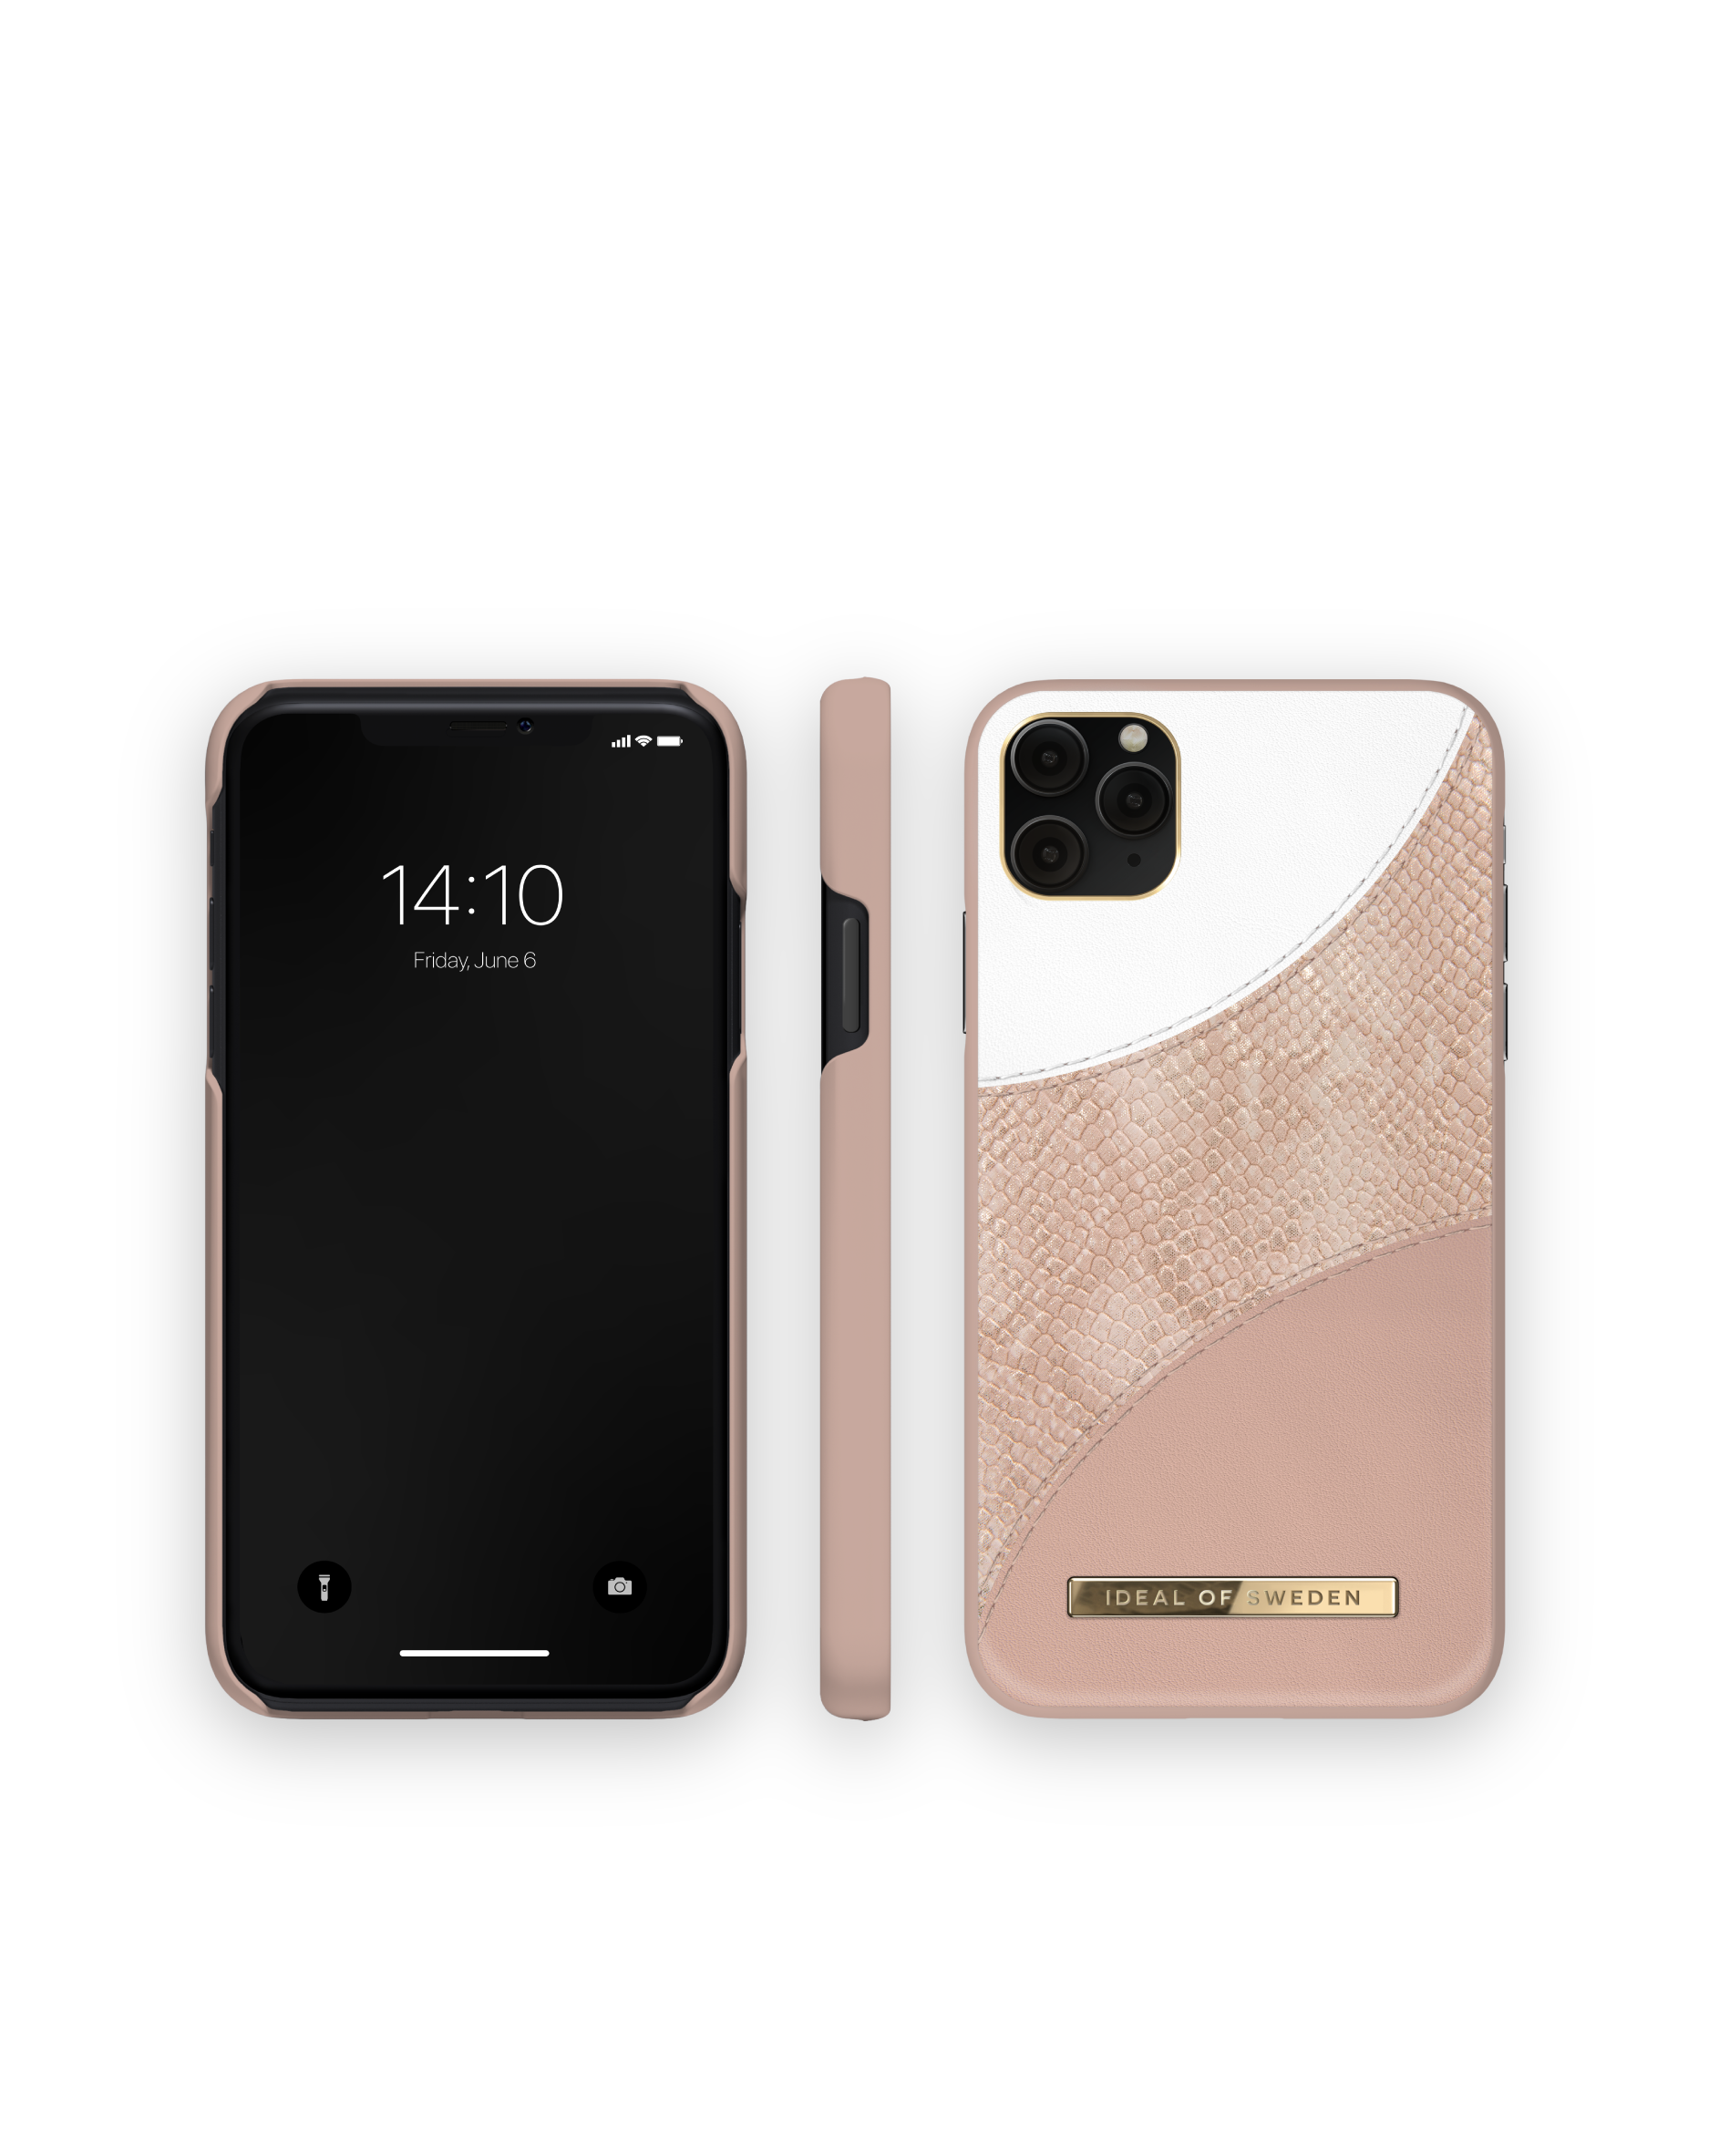 IDACSS21-I1965-269, Blush Max, iPhone IDEAL Apple OF 11 Apple Backcover, SWEDEN iPhone Snake XS Pro Max, Pink Apple,